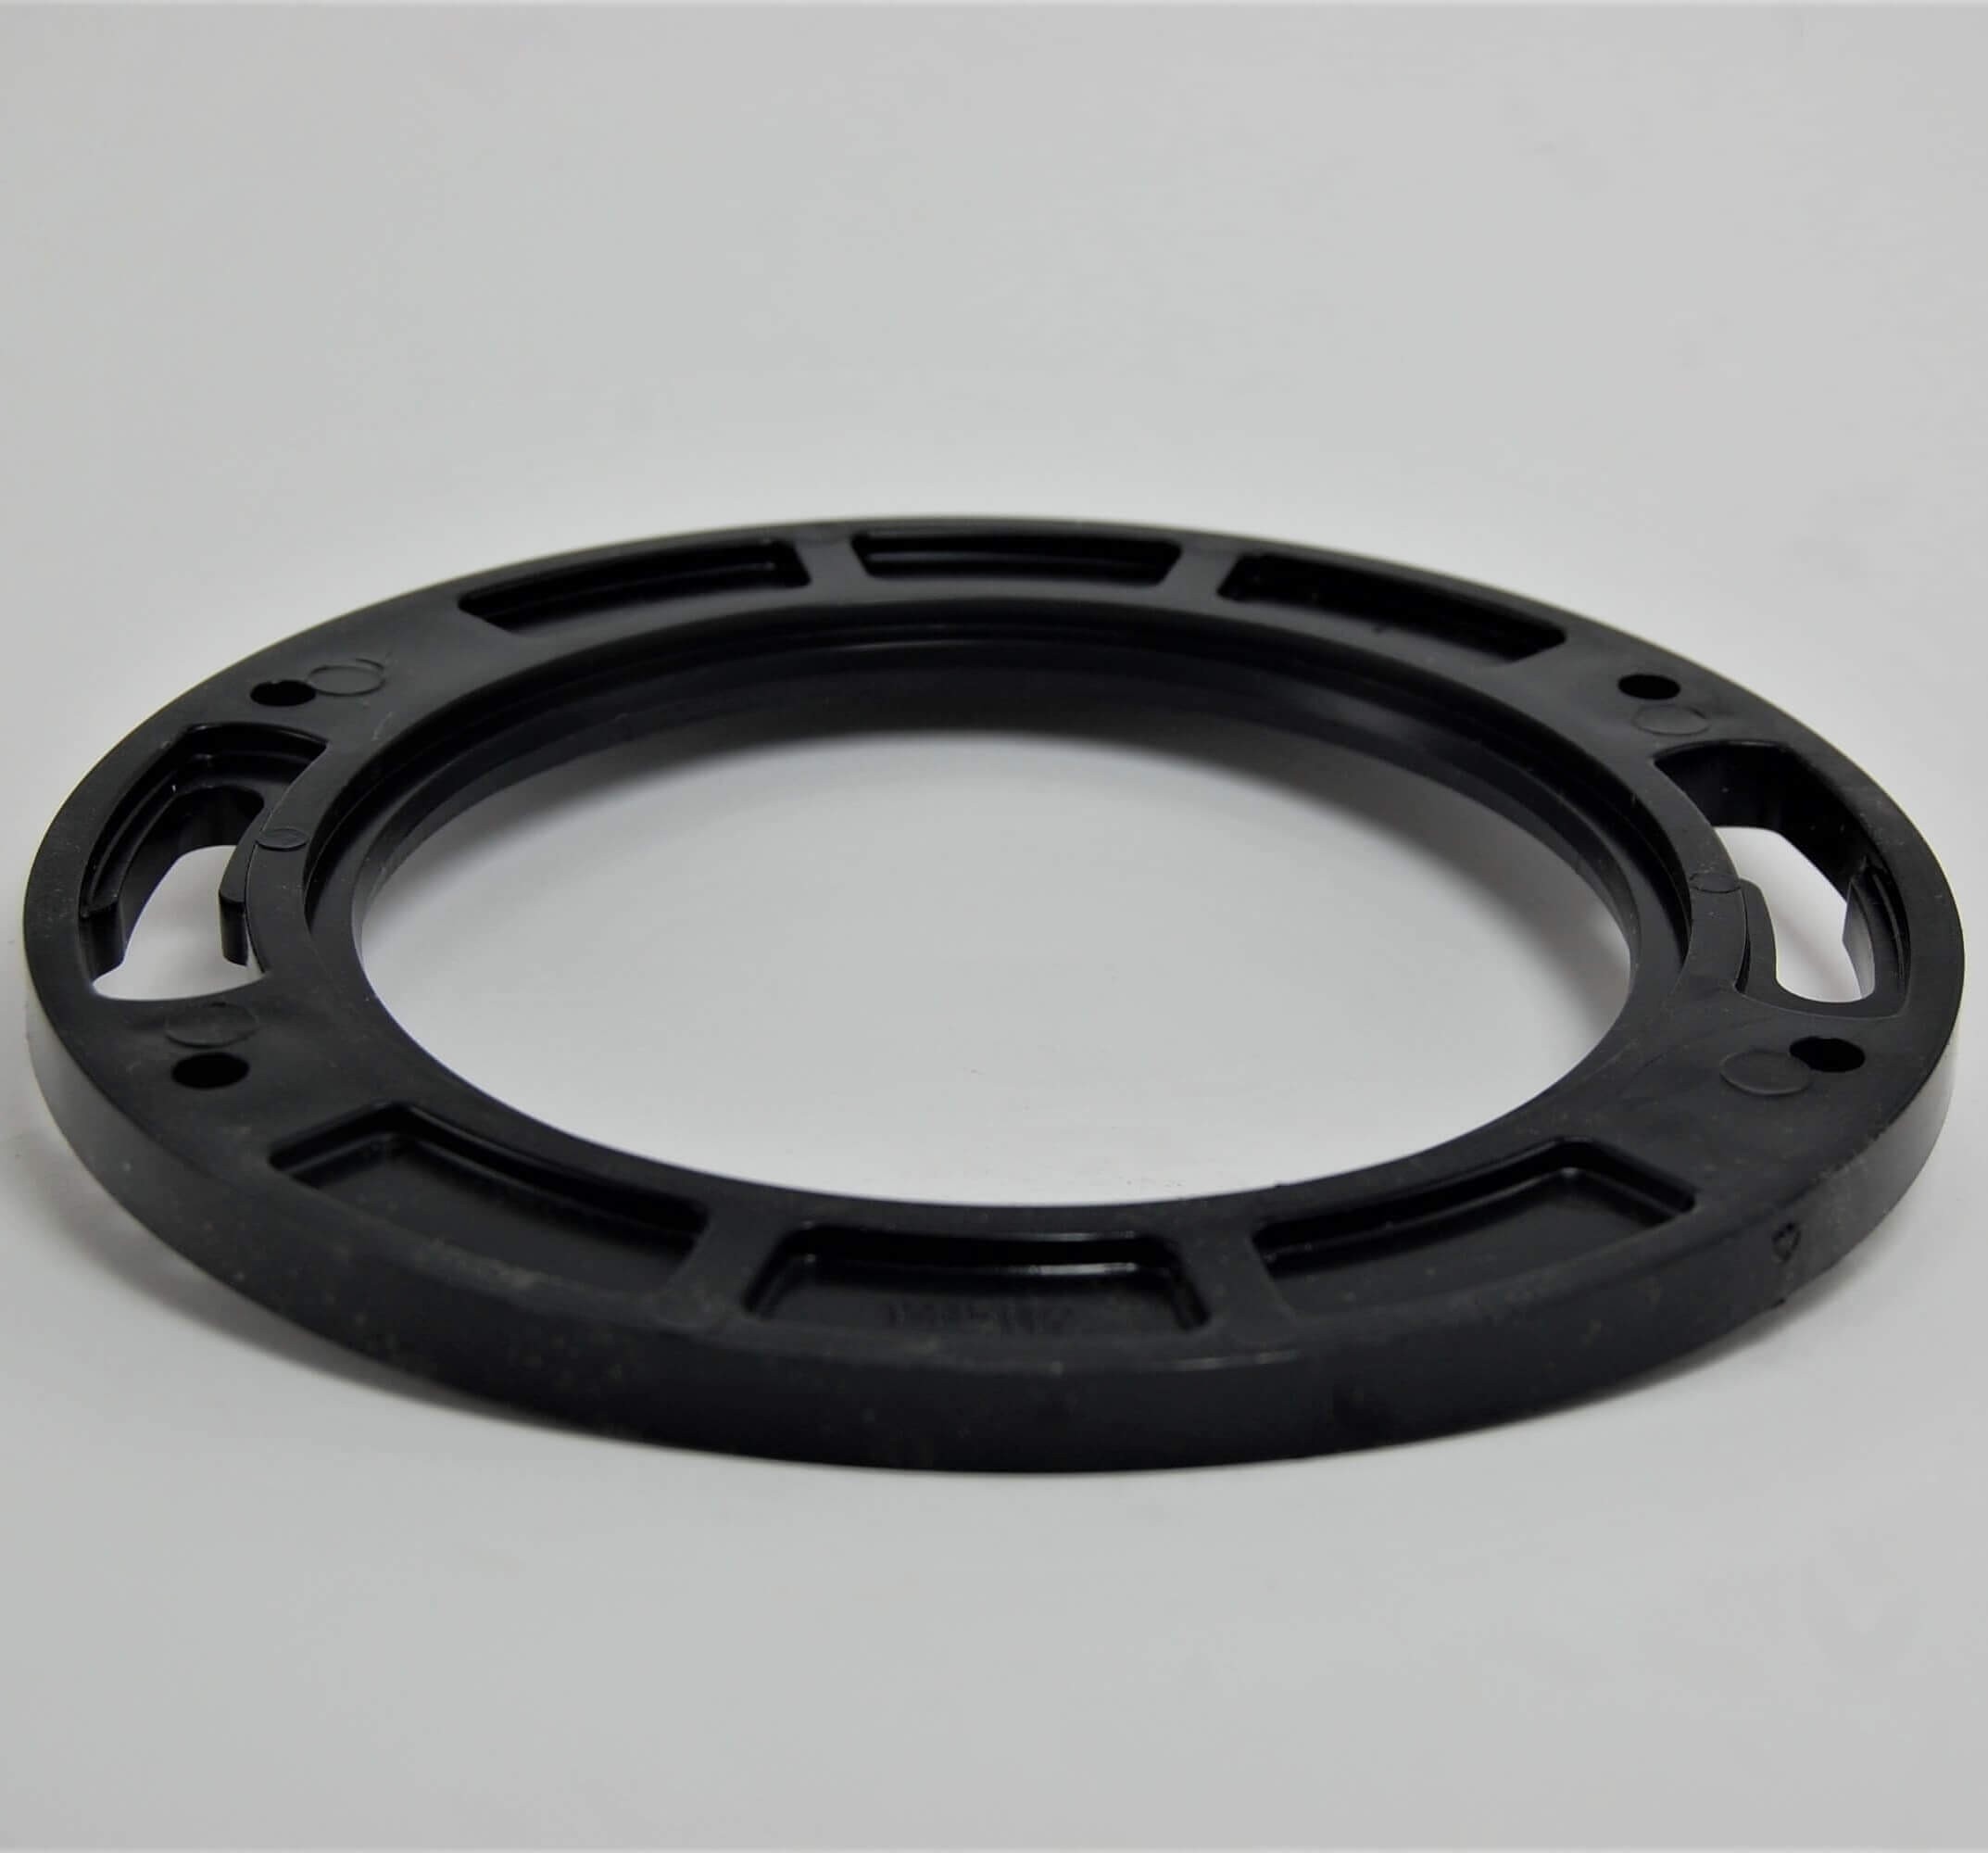 ABS Closet Flange Spacer Ring